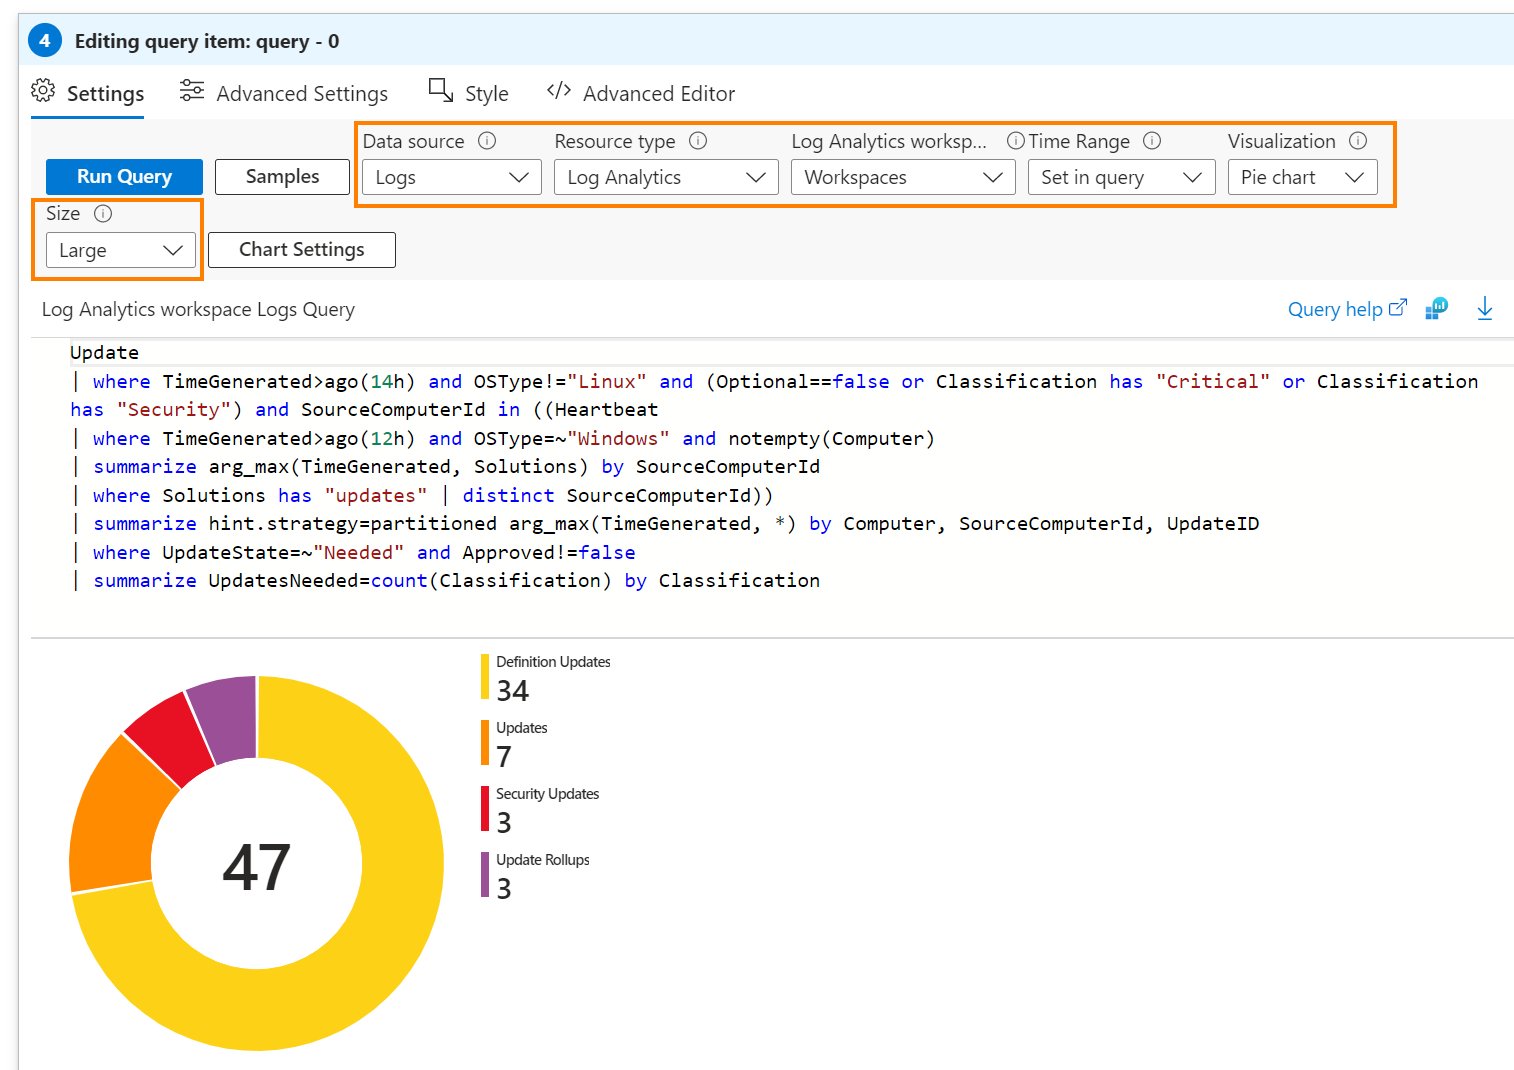 The query is based on the Azure Update Management service to visualize the Windows Updates status